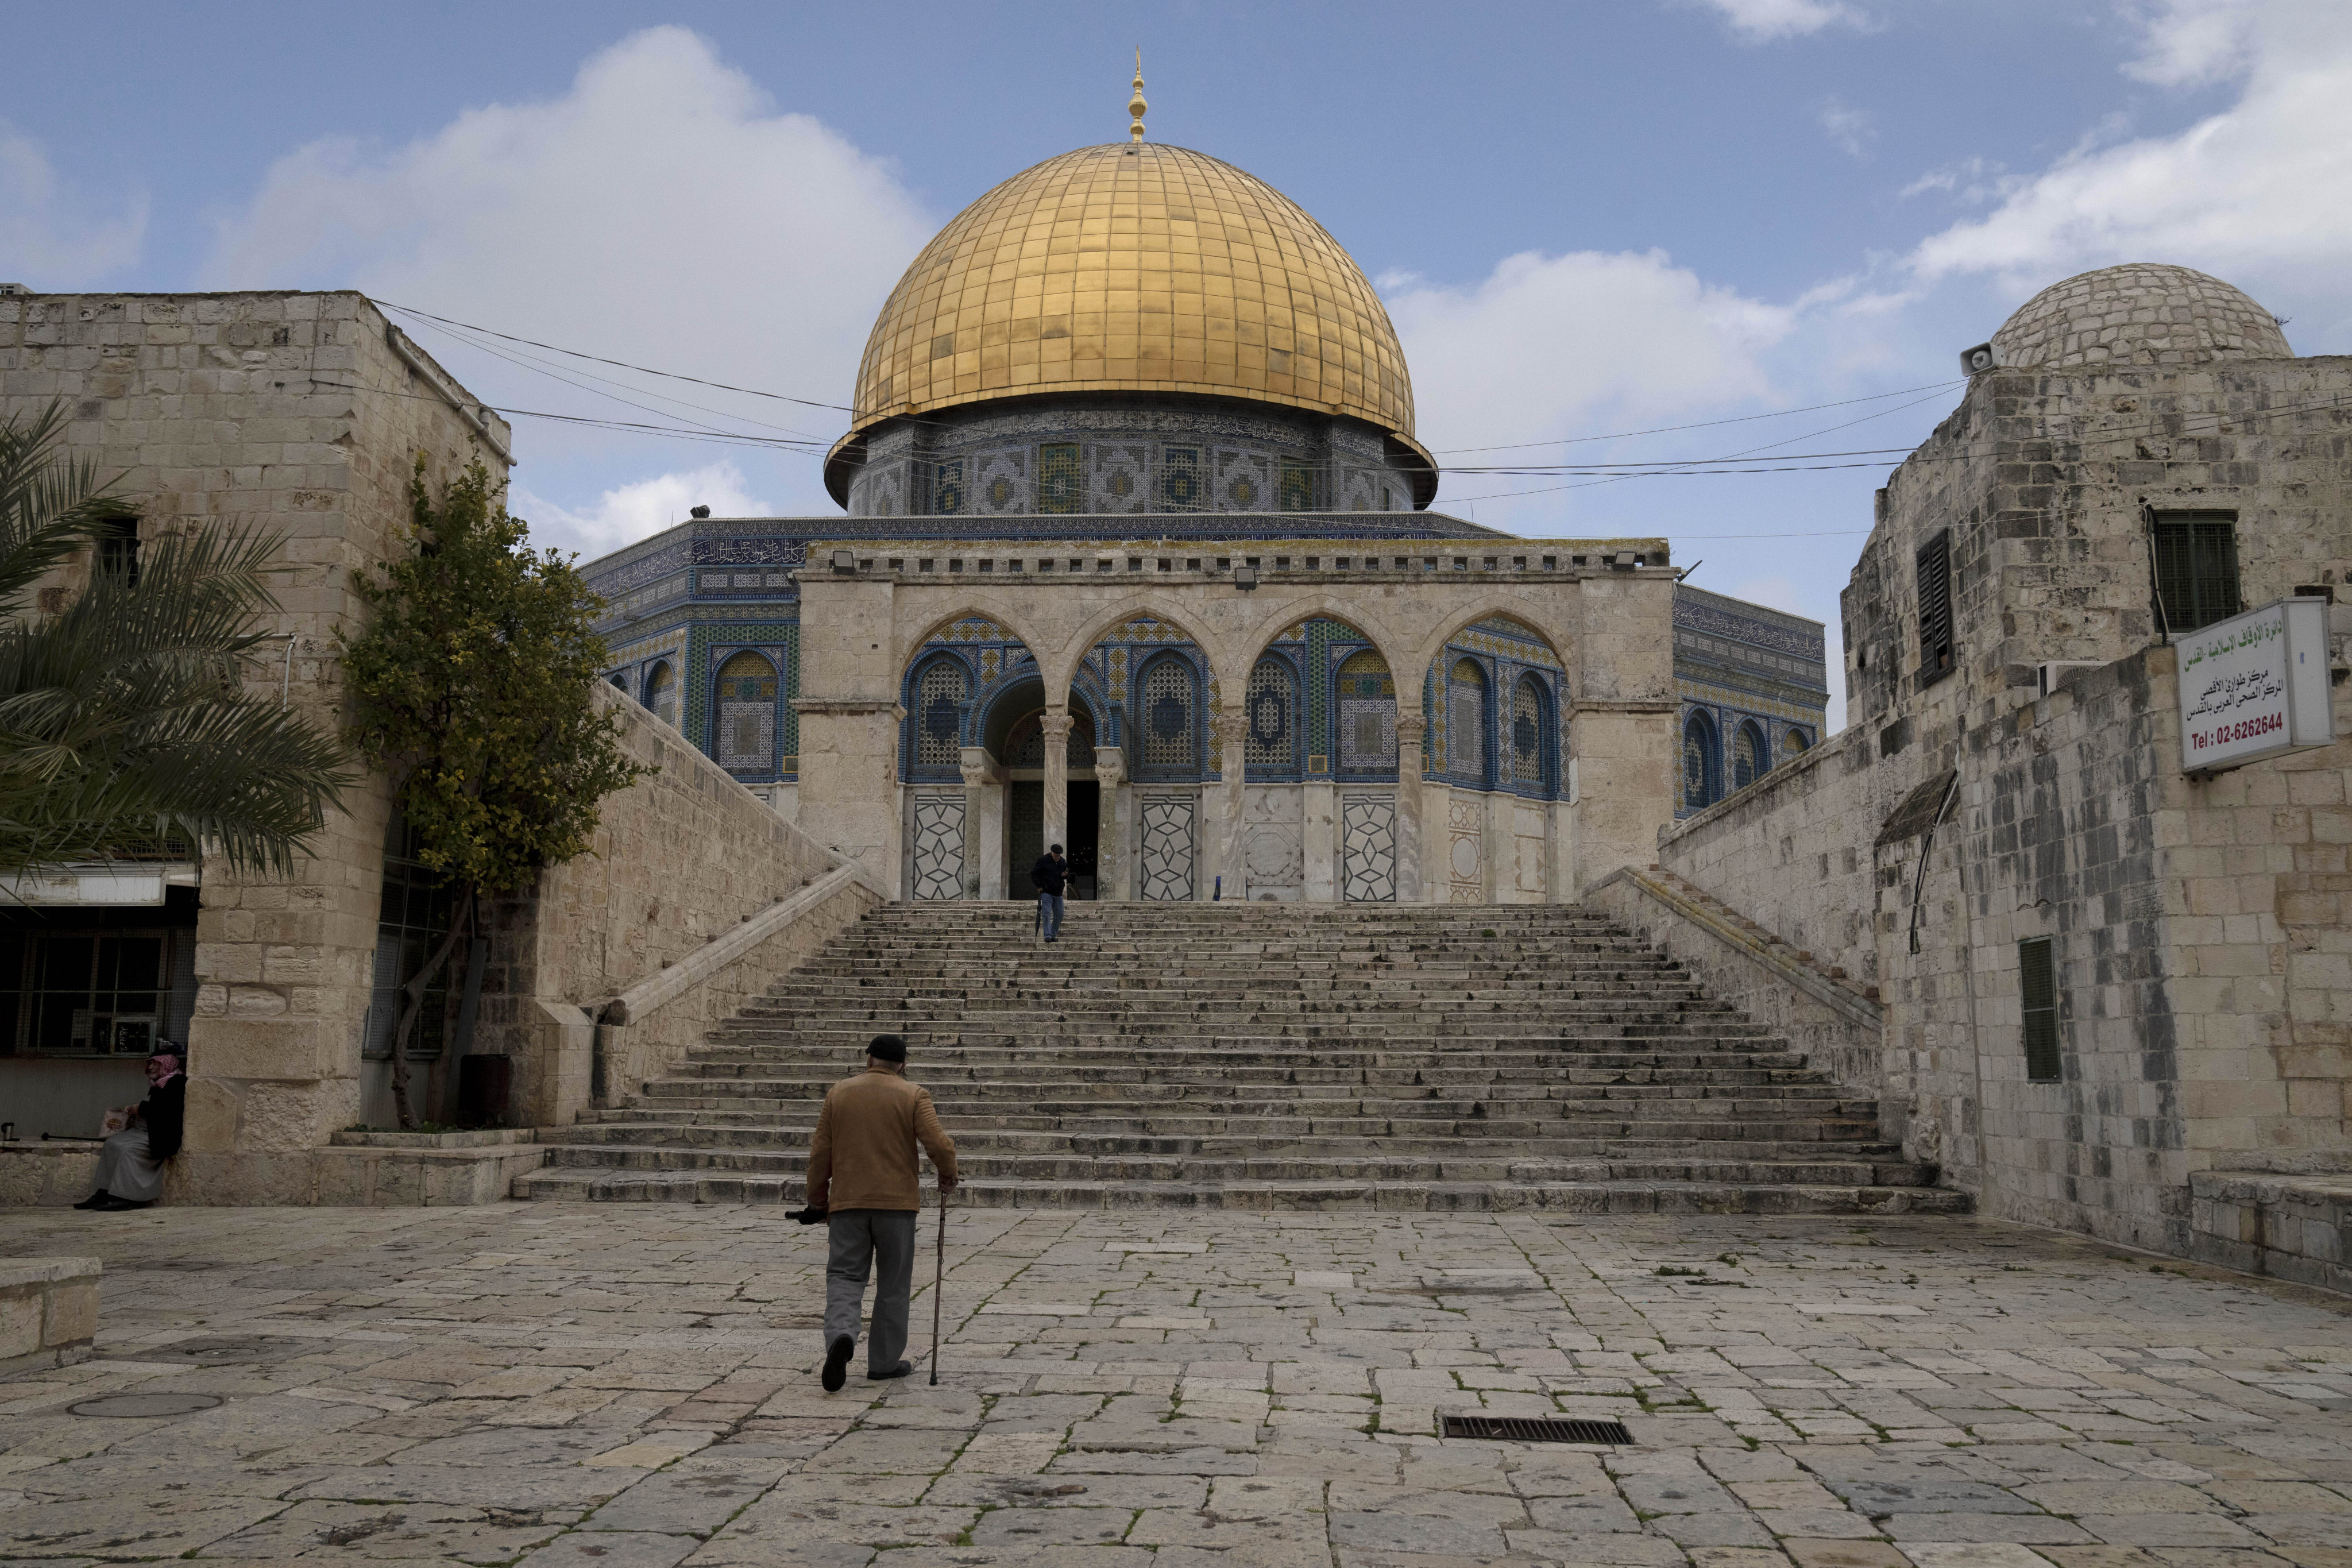 An elderly Palestinian worshipper walks to the Dome of the Rock in the Al-Aqsa Mosque compound in the Old City of Jerusalem. Photo: AP